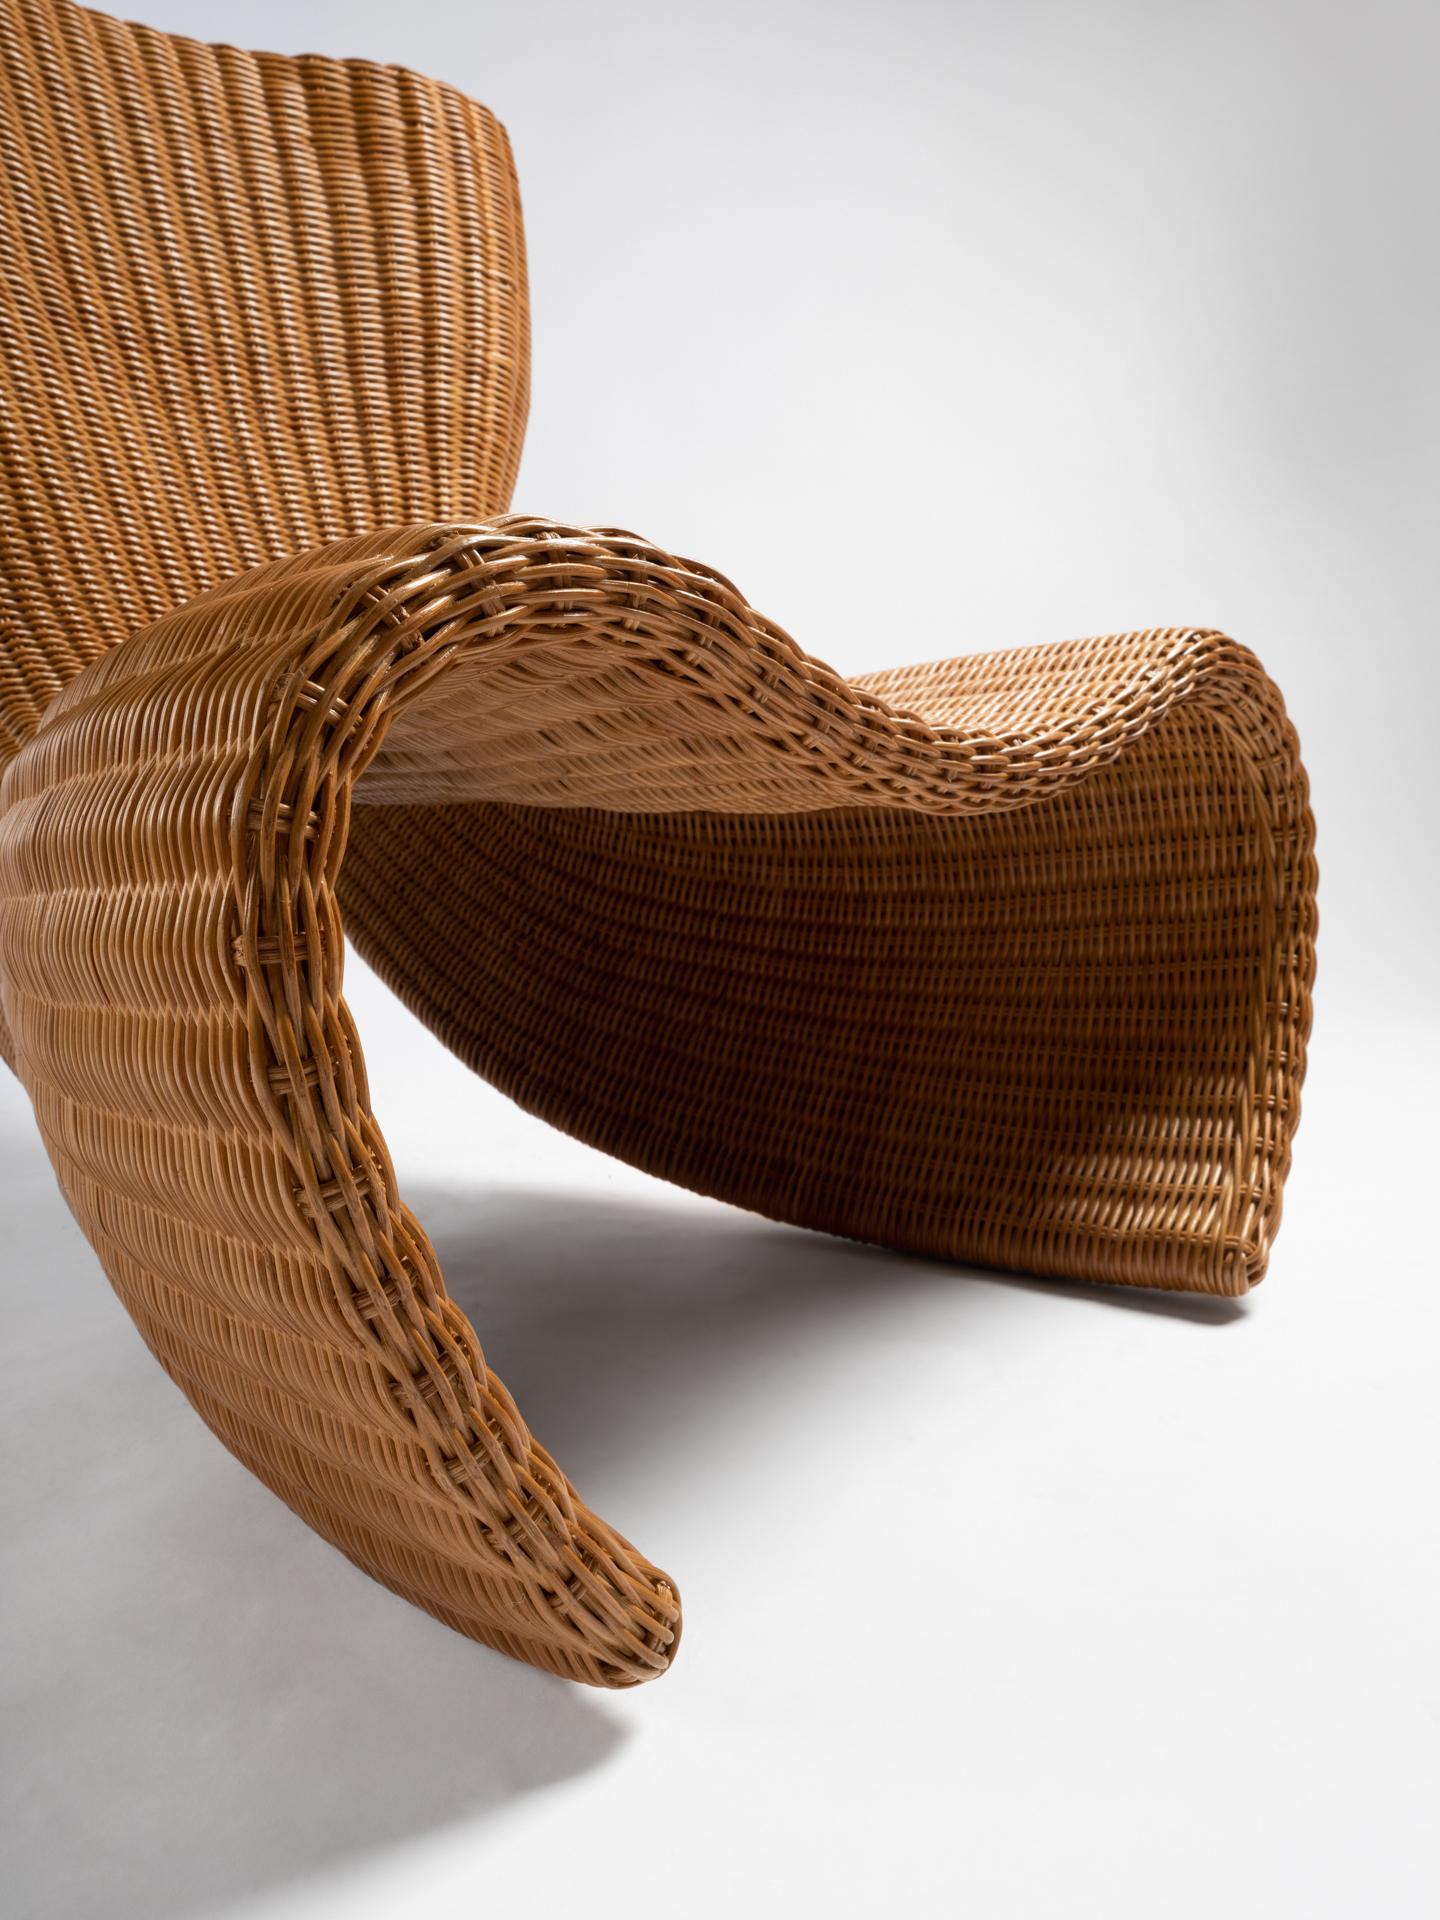 Aluminum Wicker Chair by Marc Newson For Sale